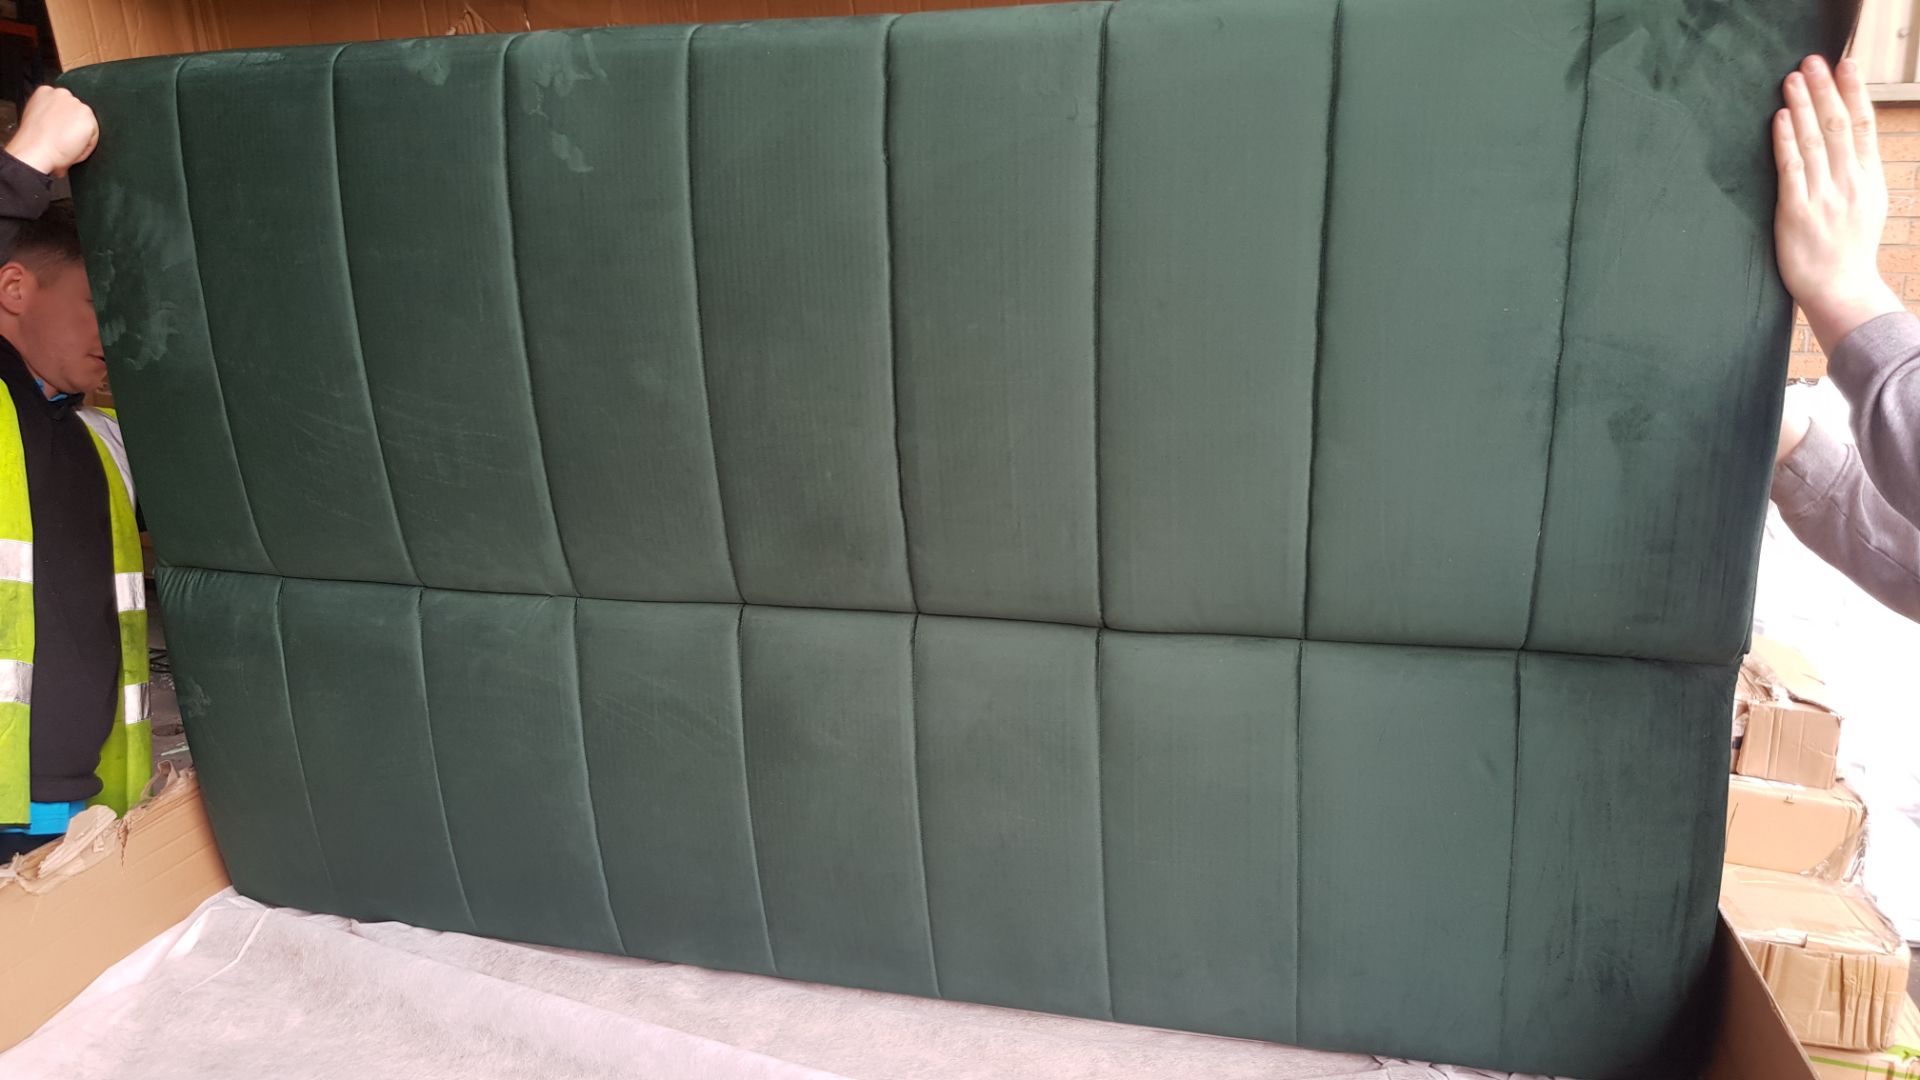 (P4) 1x Sindy Sofa Bed Deco Luxe Emerald Green RRP £250. (Sofa: H82x W181x D83cm). (Bed: H40x W181x - Image 9 of 9